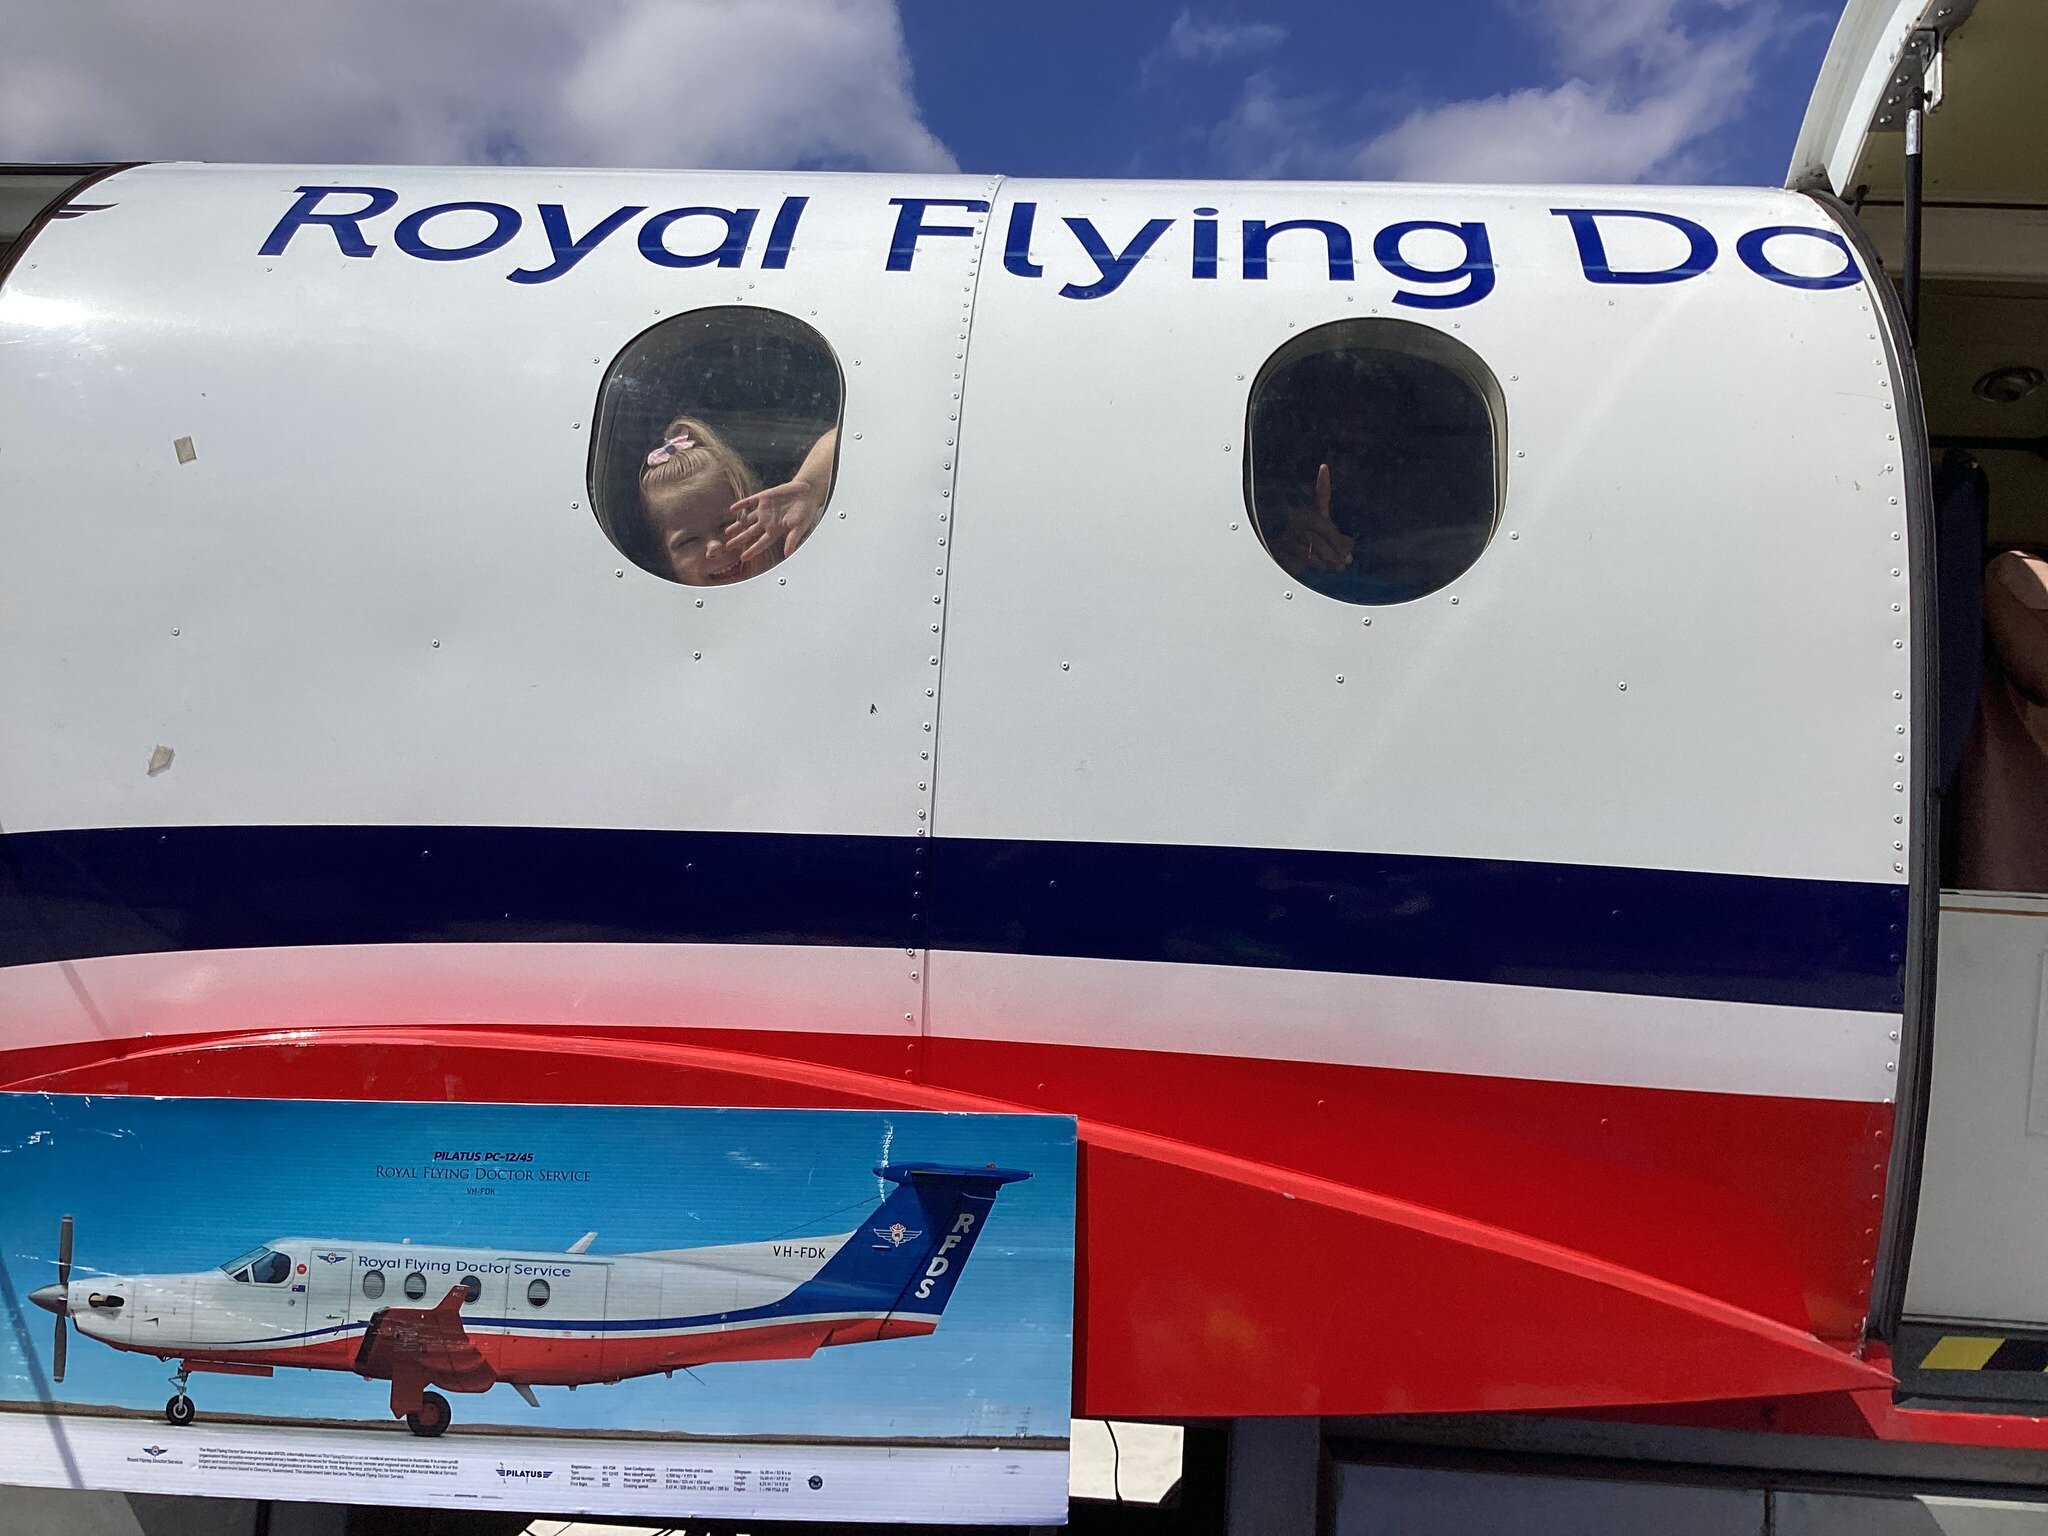 🌟✈️ Our little aviators had a blast during the Royal Flying Doctor incursion! 🚁👩&zwj;✈️ Tom, the fantastic presenter, made learning how to be a pilot an absolute delight. From the mini plane simulator with adorable patient teddy bears to the flyin